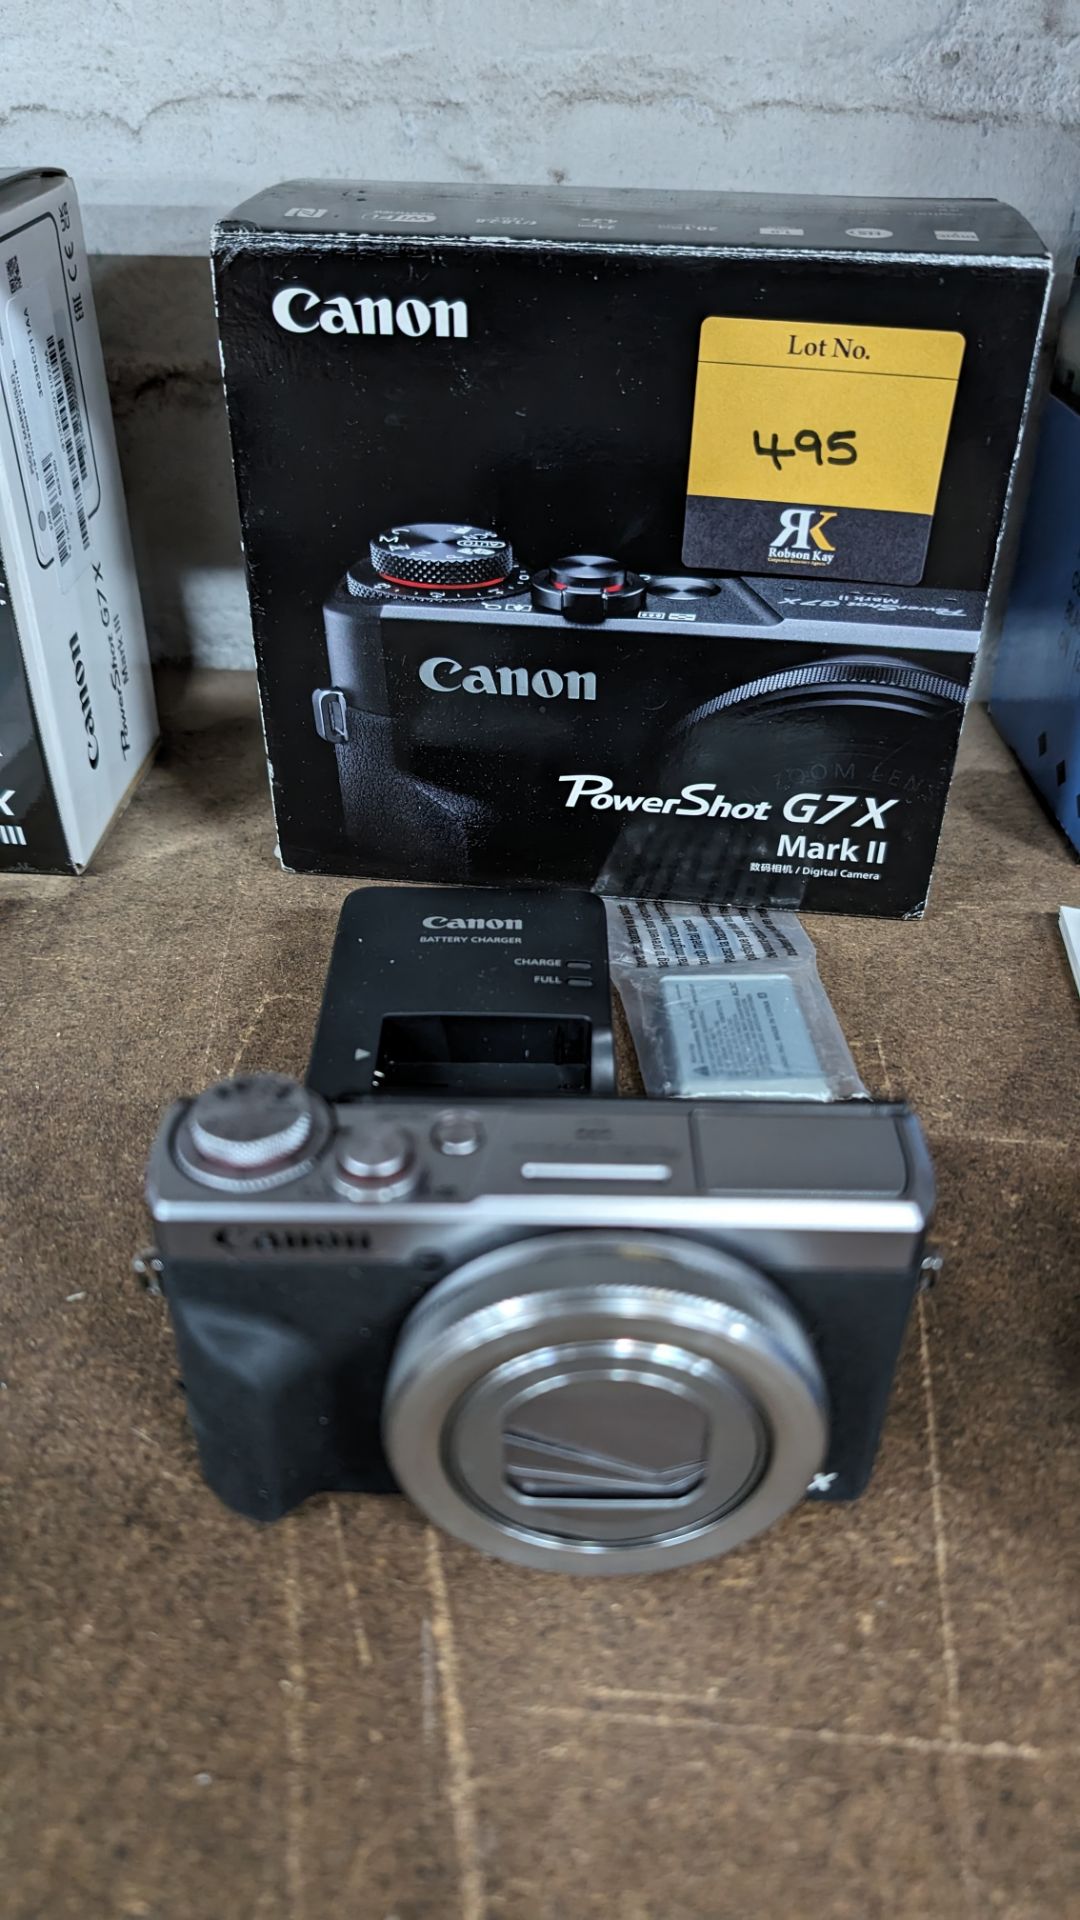 Canon PowerShot G7X Mark II camera, including battery and charger - Image 12 of 12